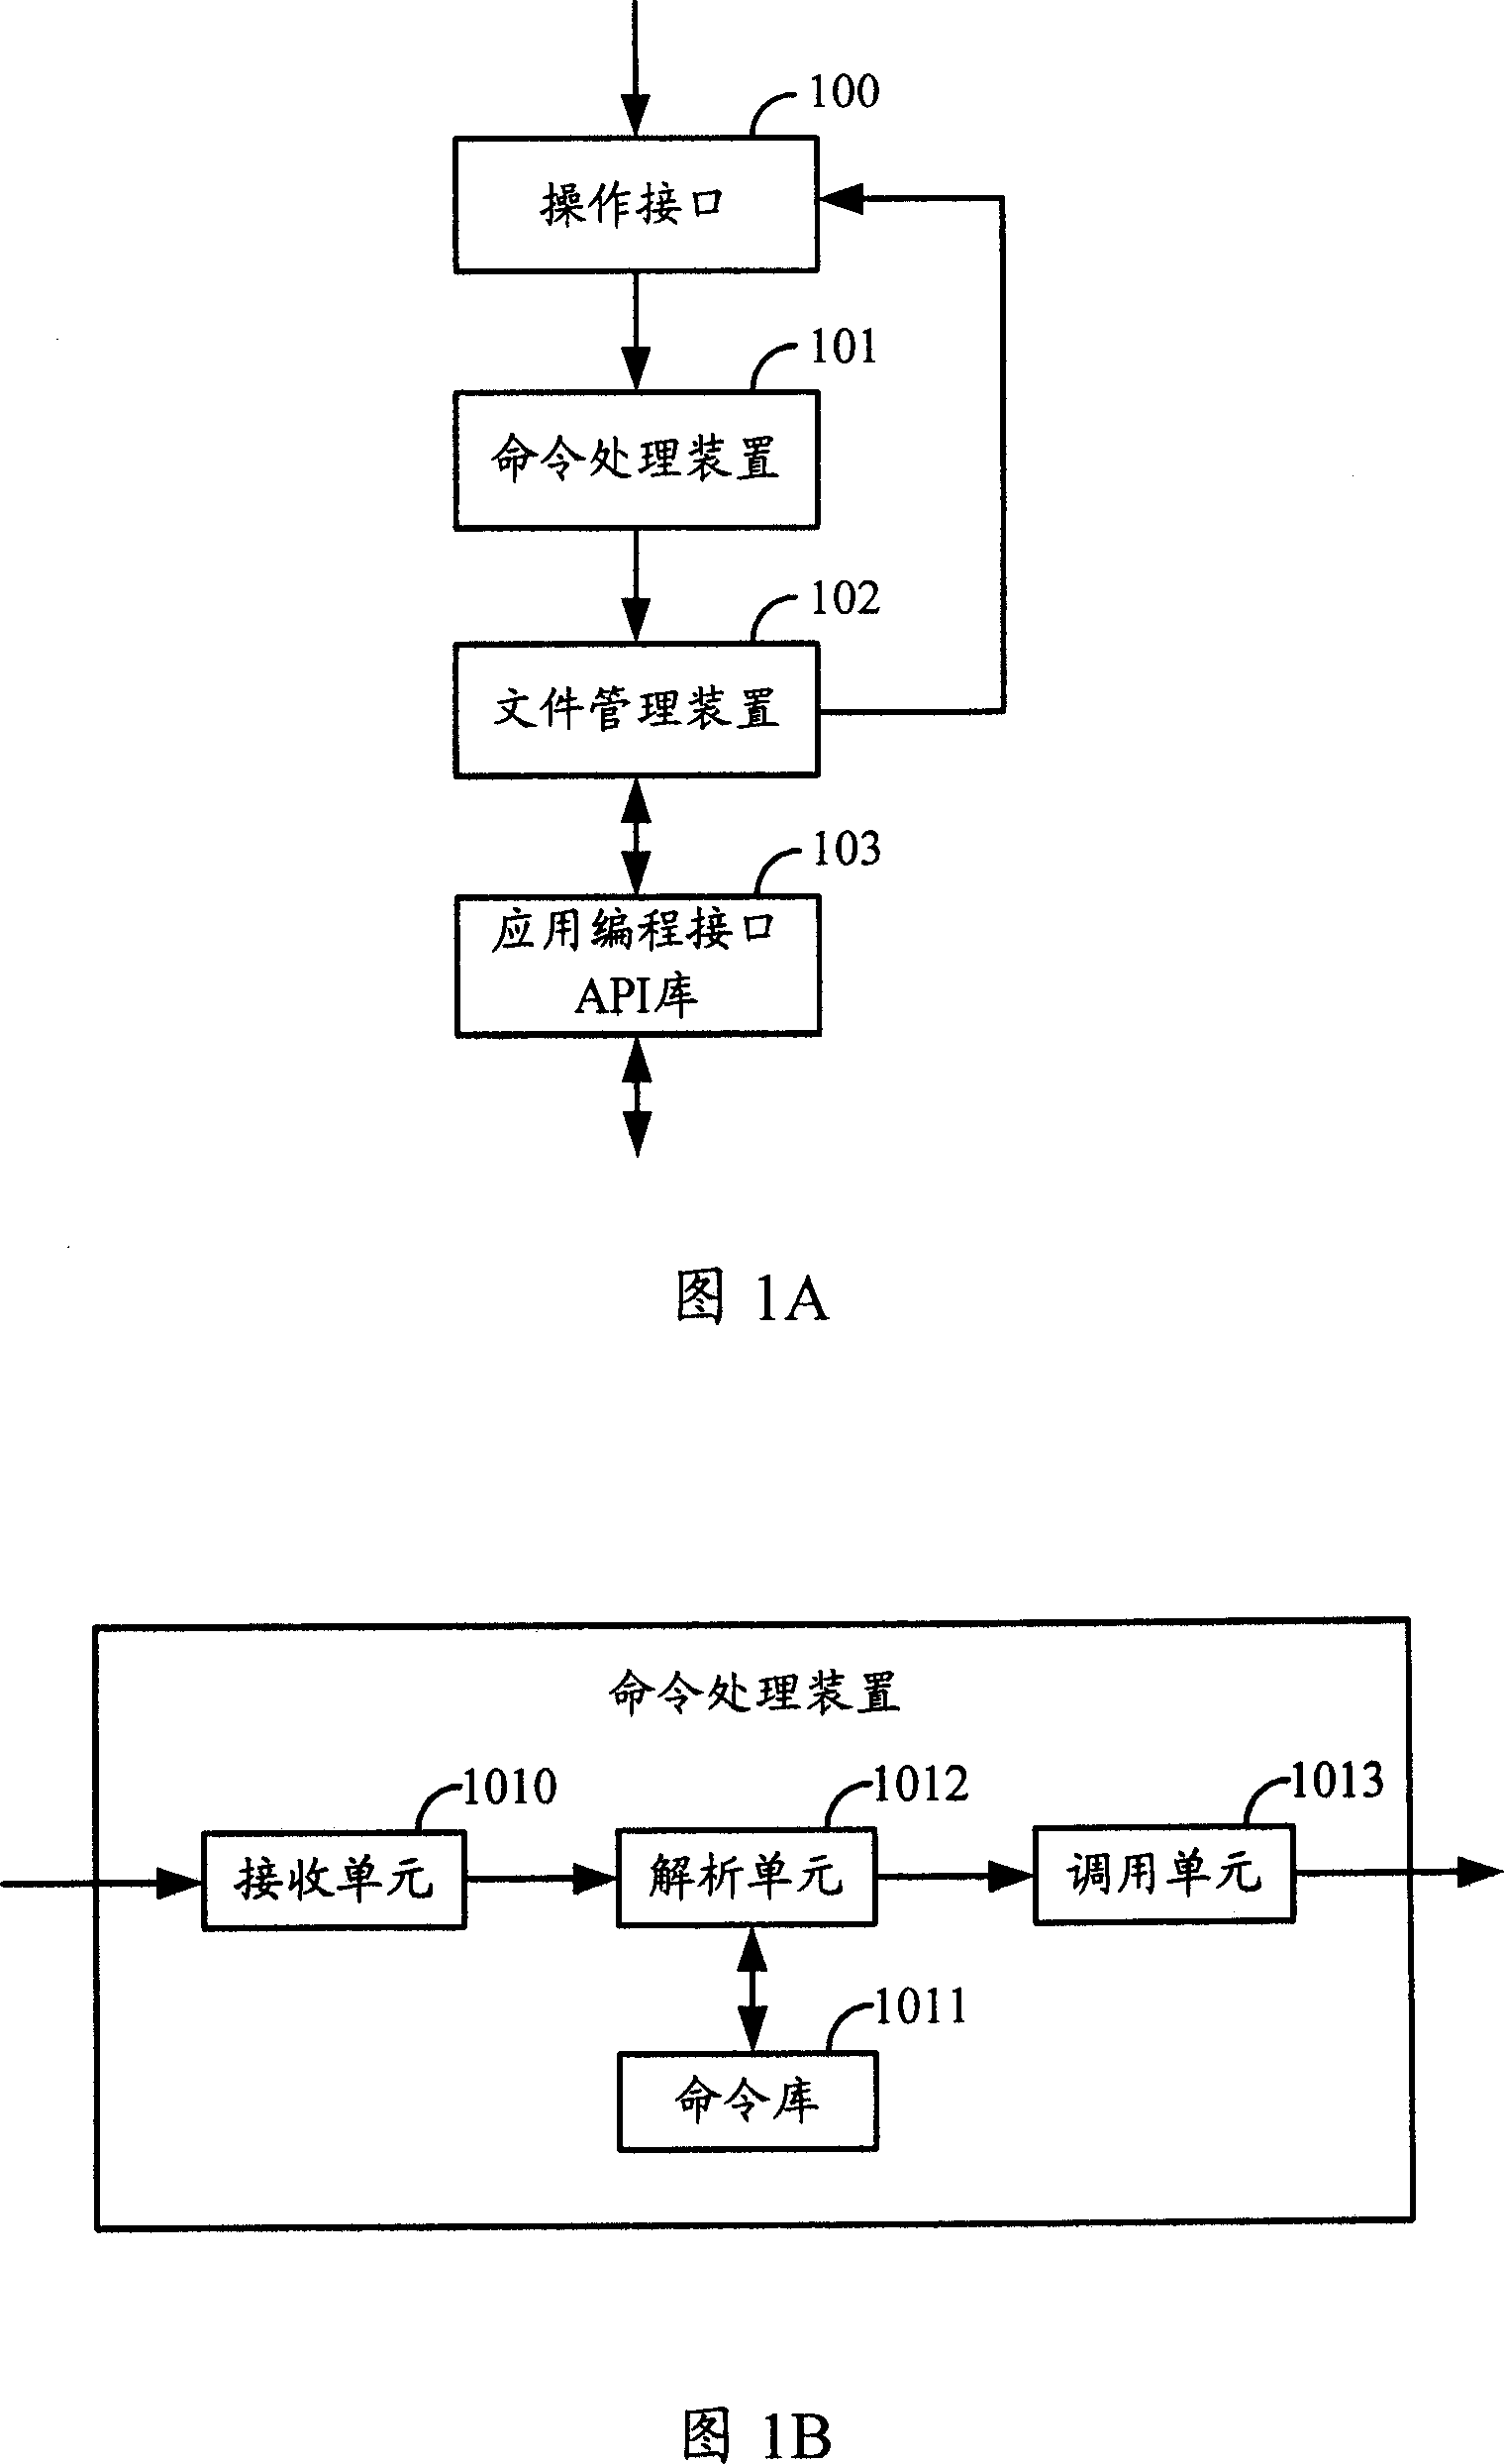 Method and system for testing embeded file system